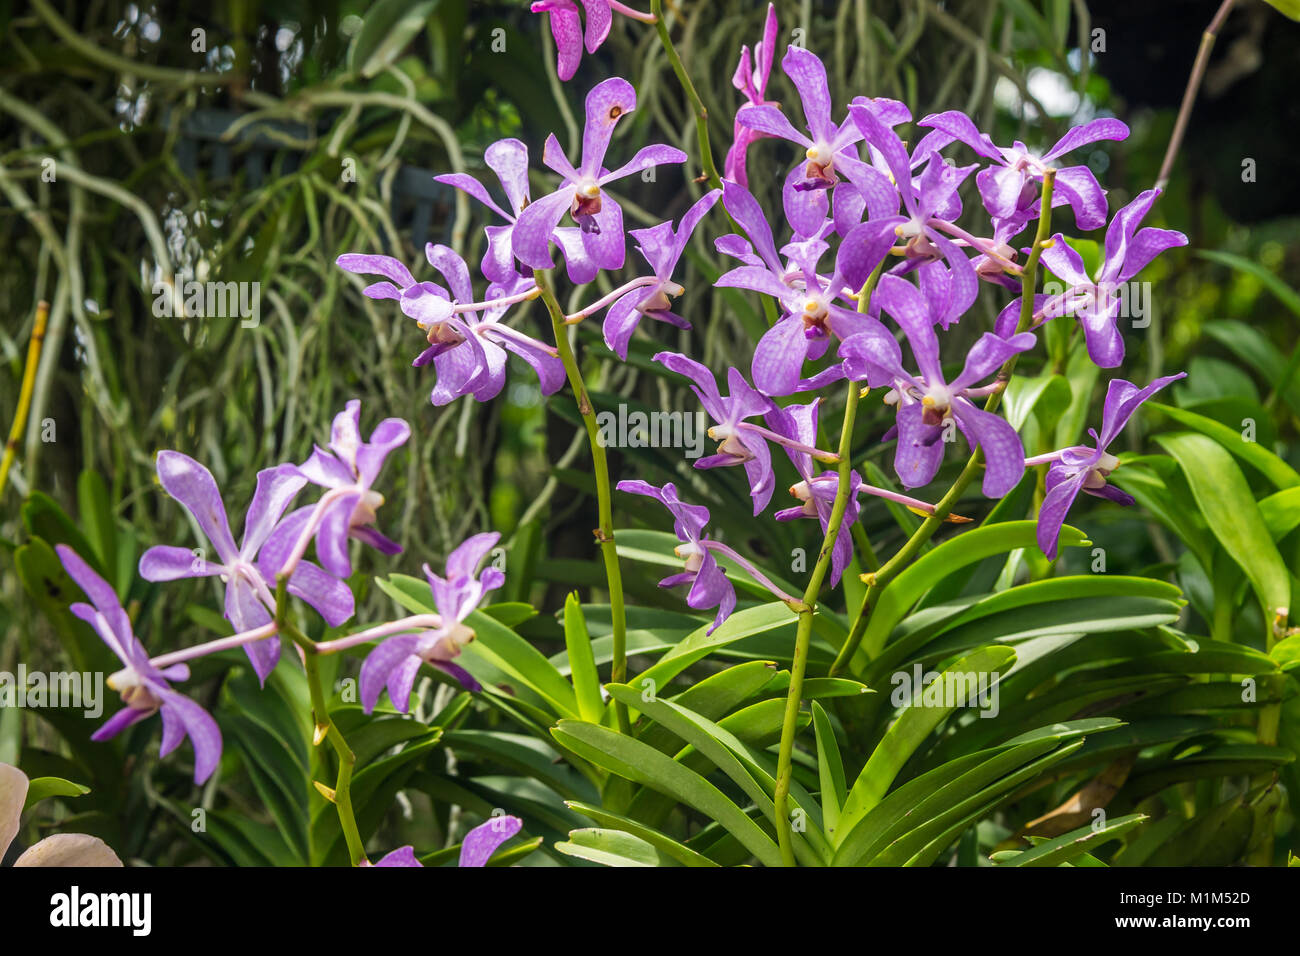 Purple orchid flower in flower plant selectively focus Stock Photo